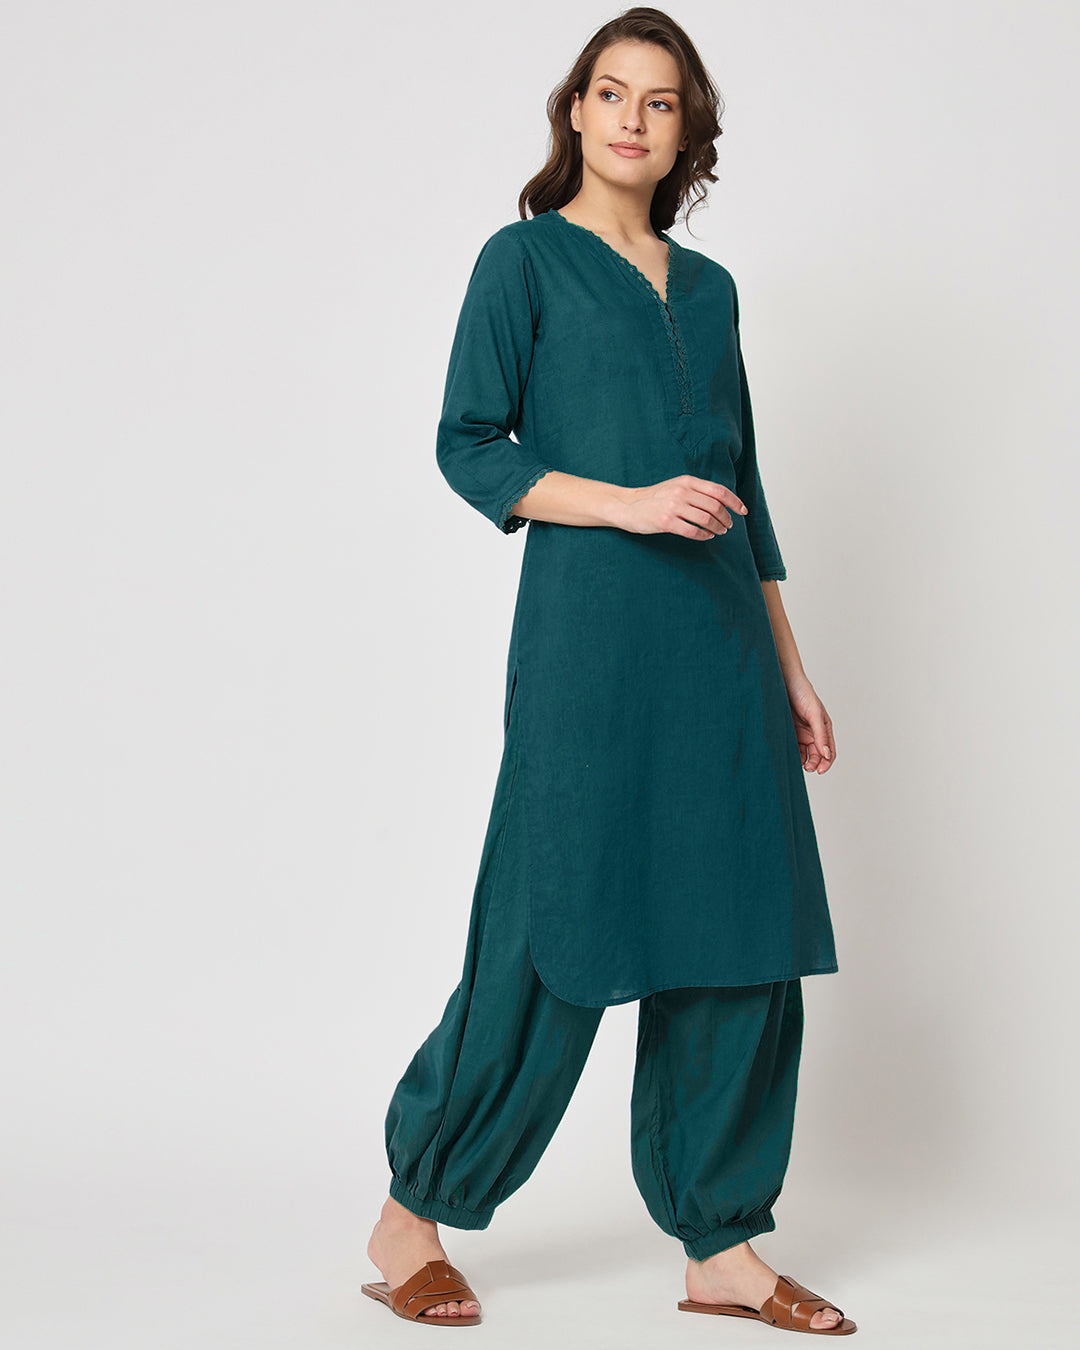 Deep Teal Lace Affair Solid Kurta (Without Bottoms)